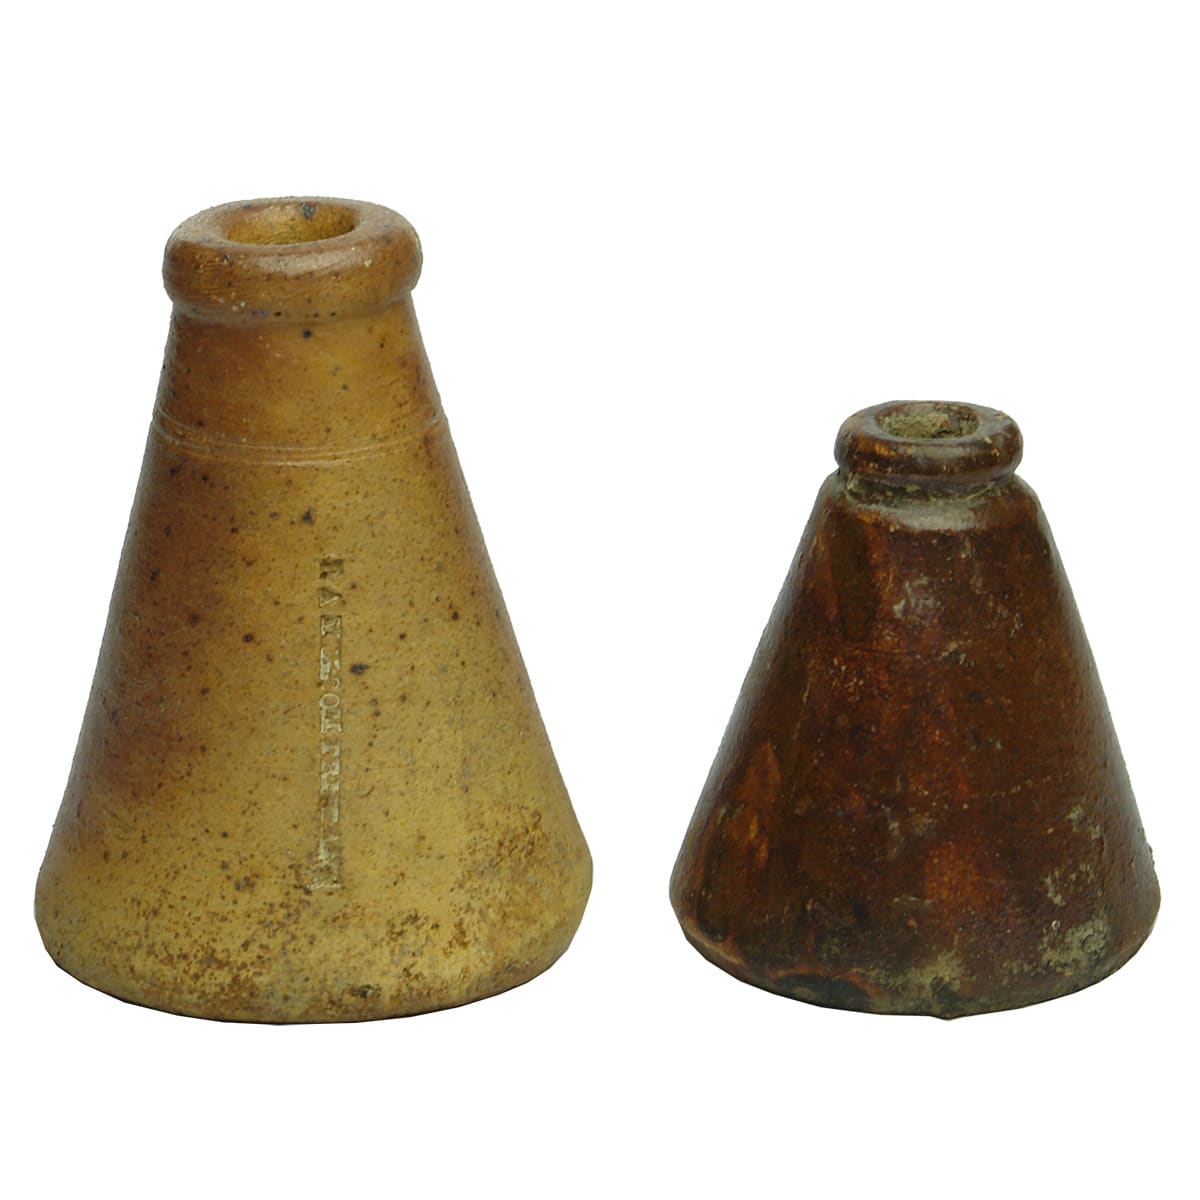 Two QLD Cone Inks: B A Melsom Brisbane and unmarked crude pottery. (Queensland)